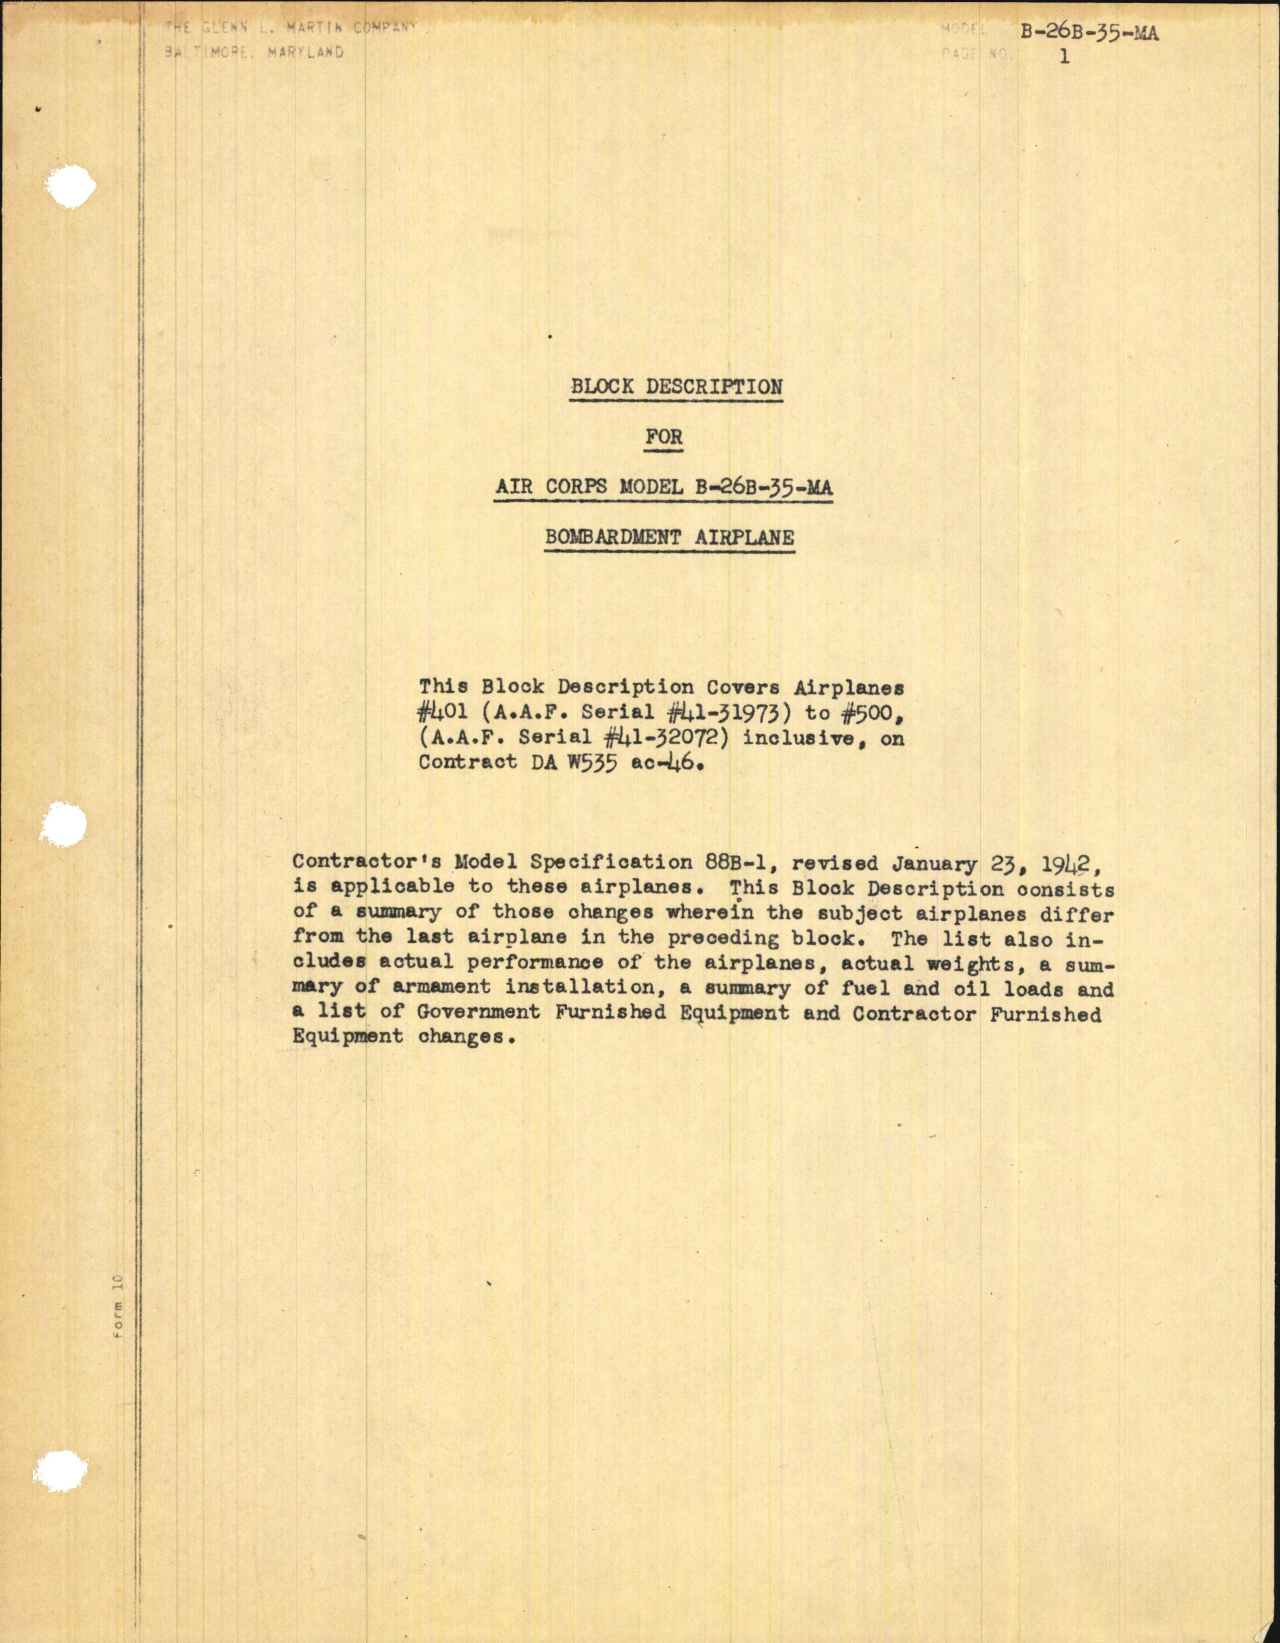 Sample page 5 from AirCorps Library document: Block Description for Air Corps Model B-26B-35-MA Bombardment Airplane